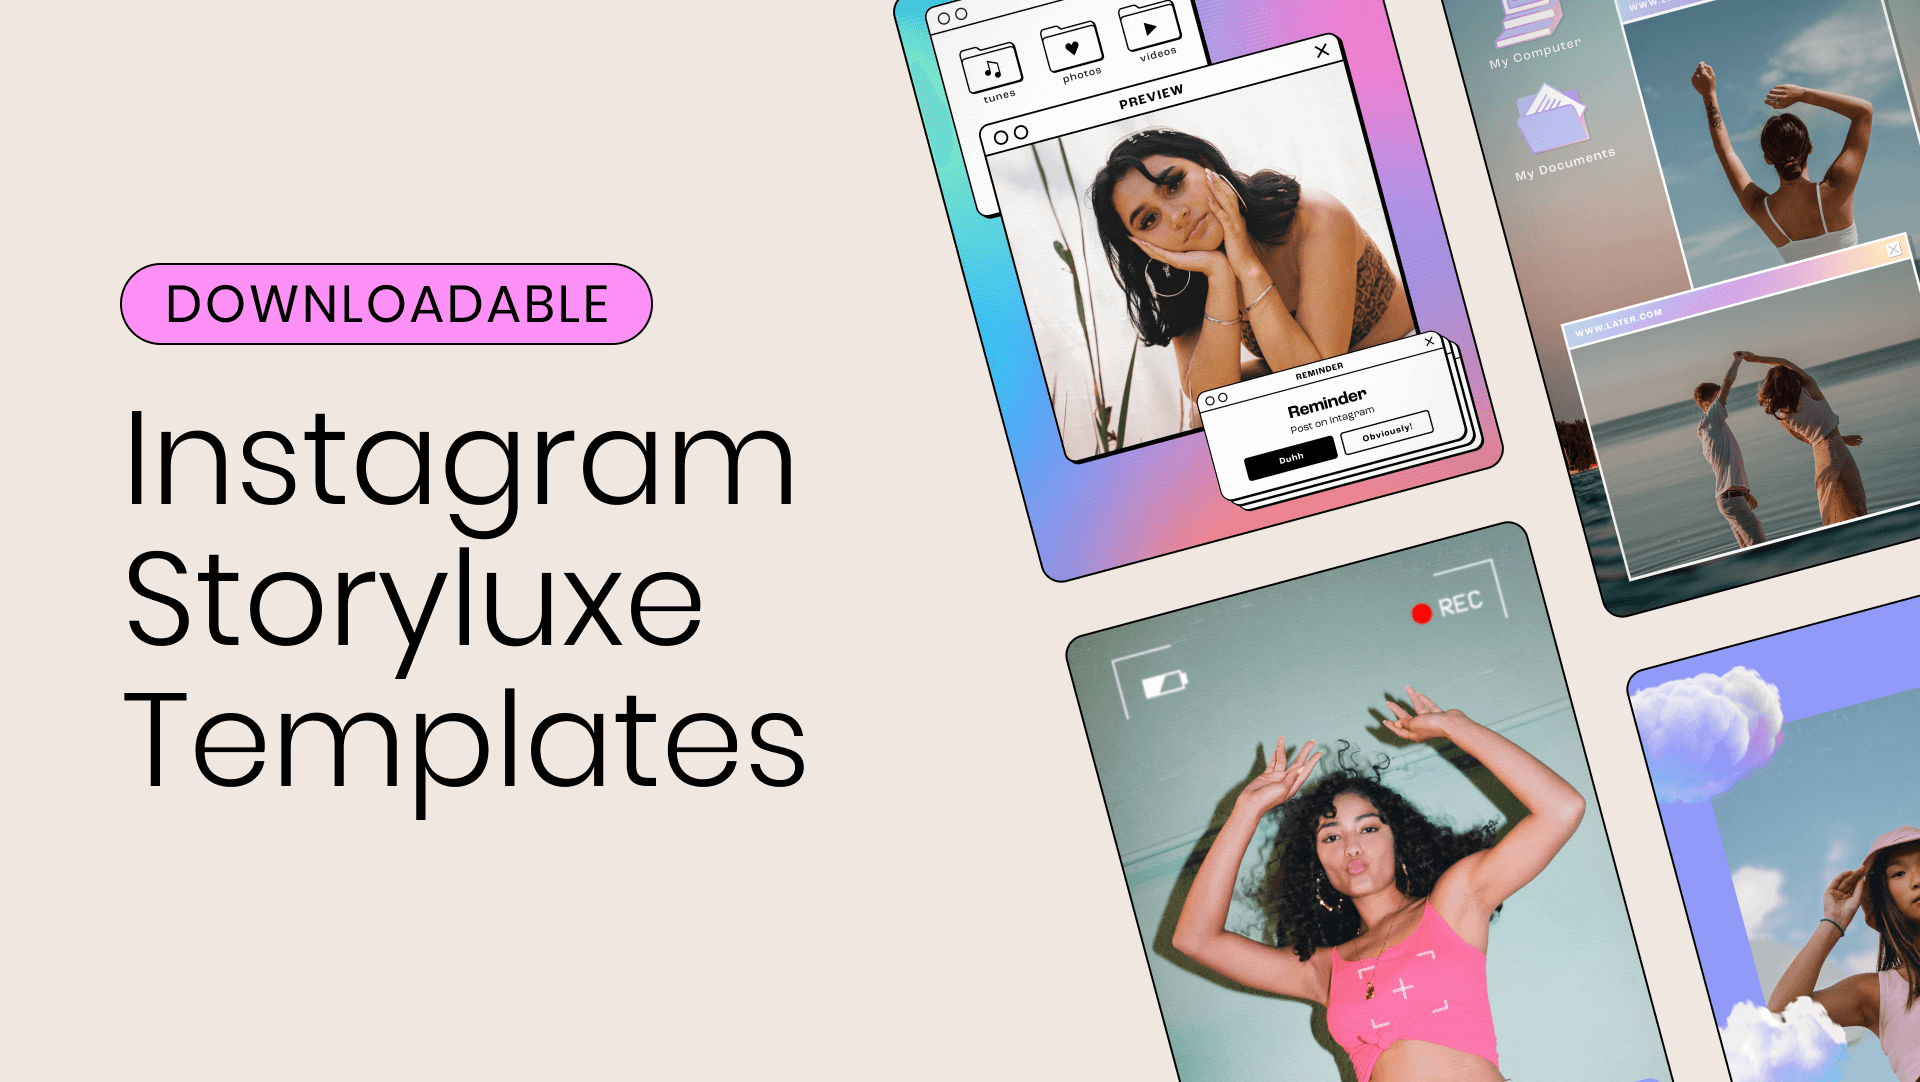 Image with text reading Downloadable Instagram Storyluxe Templates with 4 Instagram posts in background